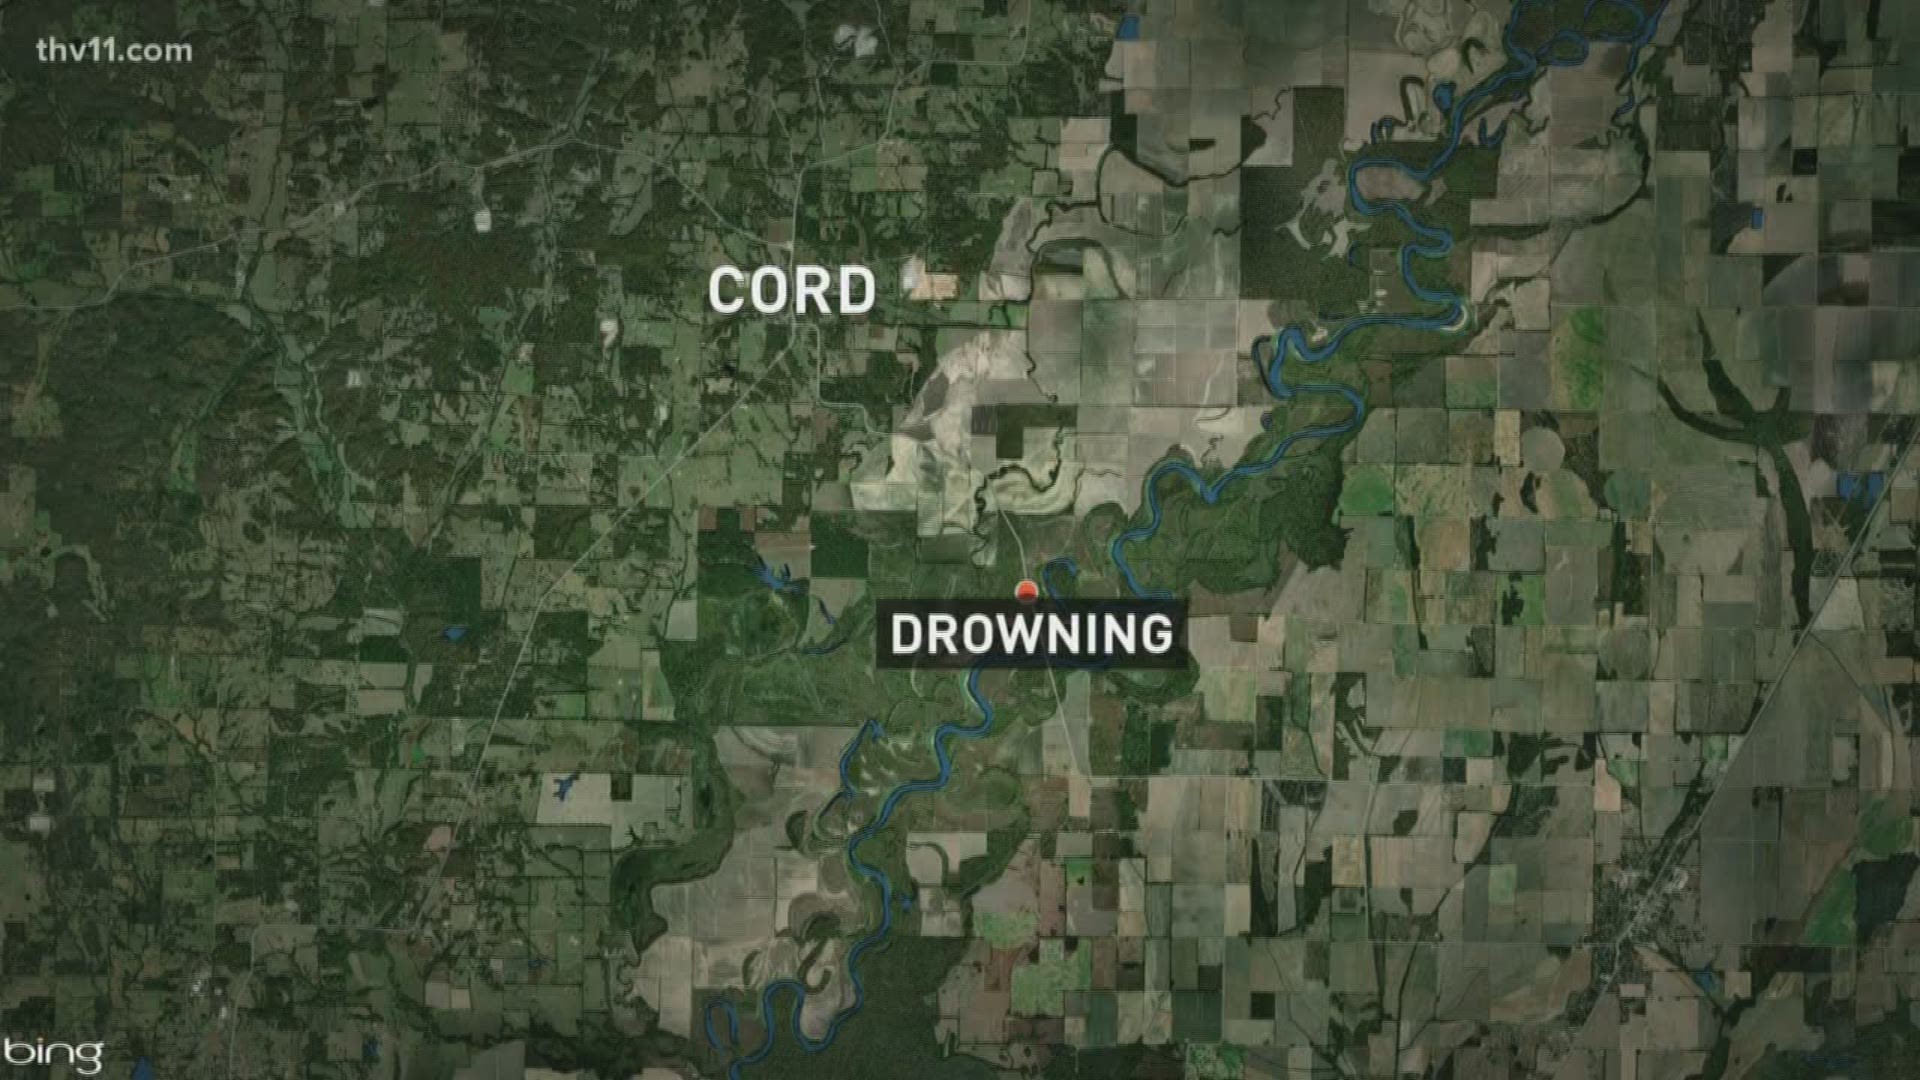 Arkansas State Troopers and deputies in Independence County say they recovered the body of a man who drowned after he attempted to drive on a flooded road.